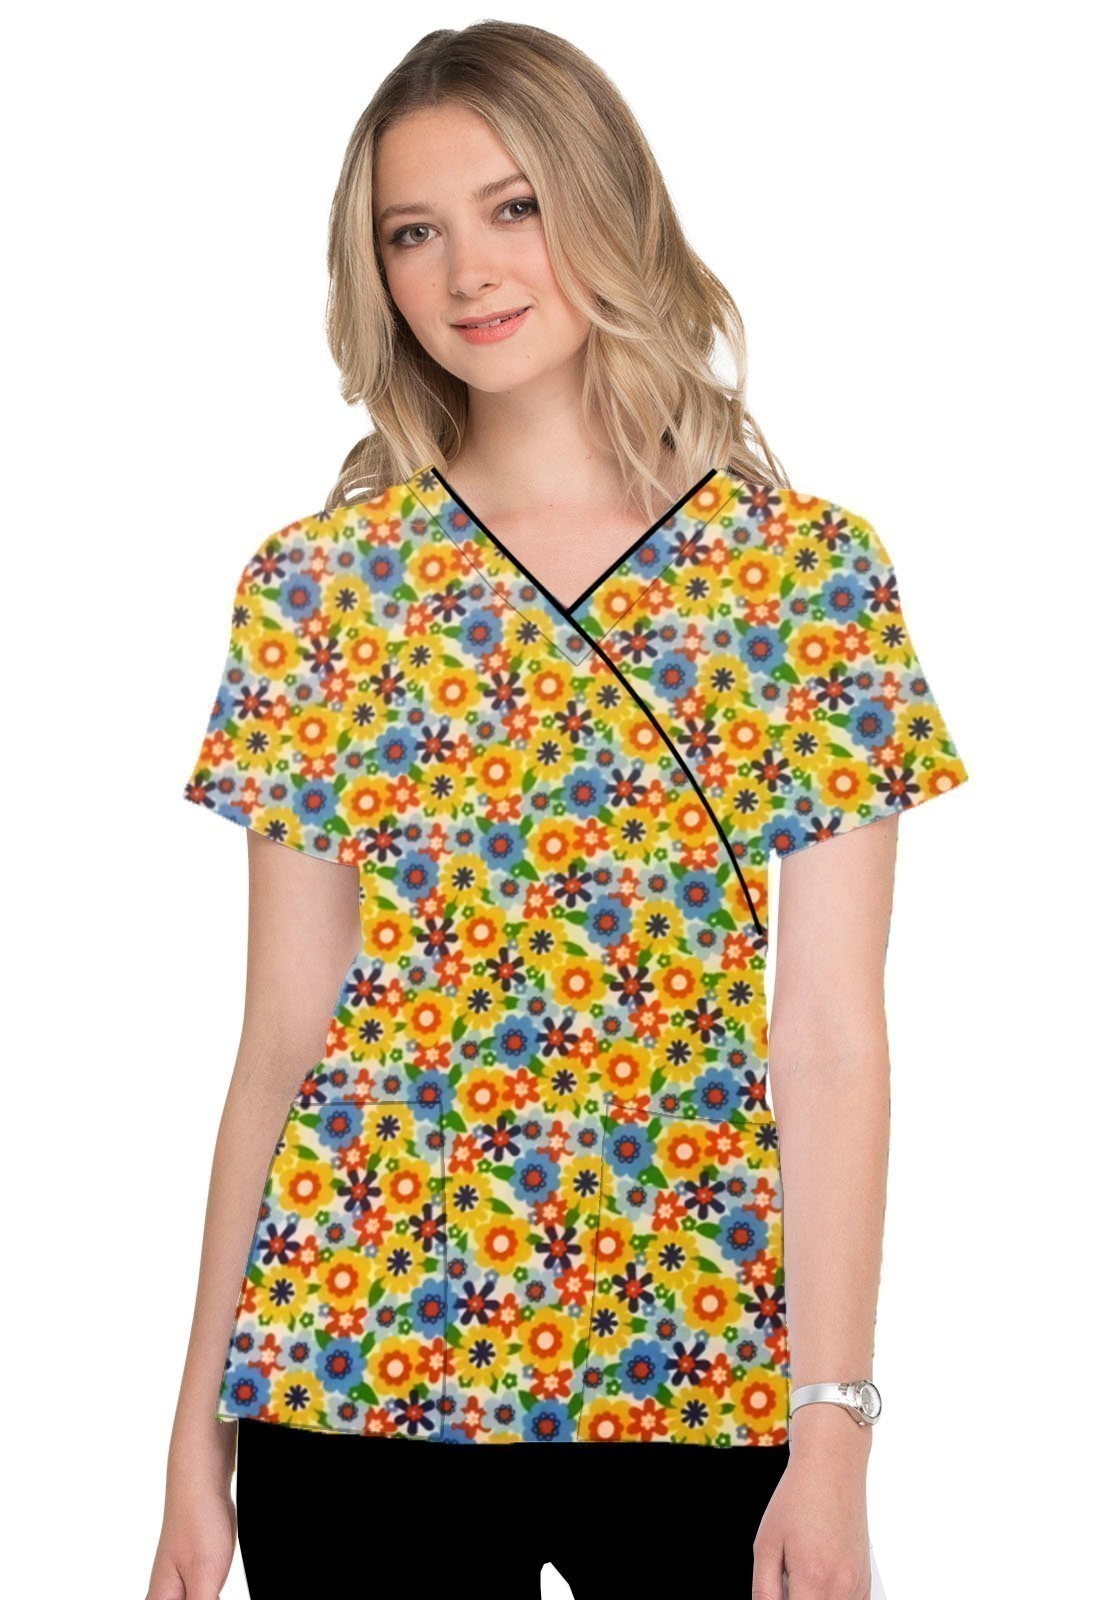 Blooming Flowers Print Scrub Set Mock Wrap With Black Piping 5 Pocket Half Sleeves (Top 3 Pockets With Black Bottom 2 Pockets Boot cut)